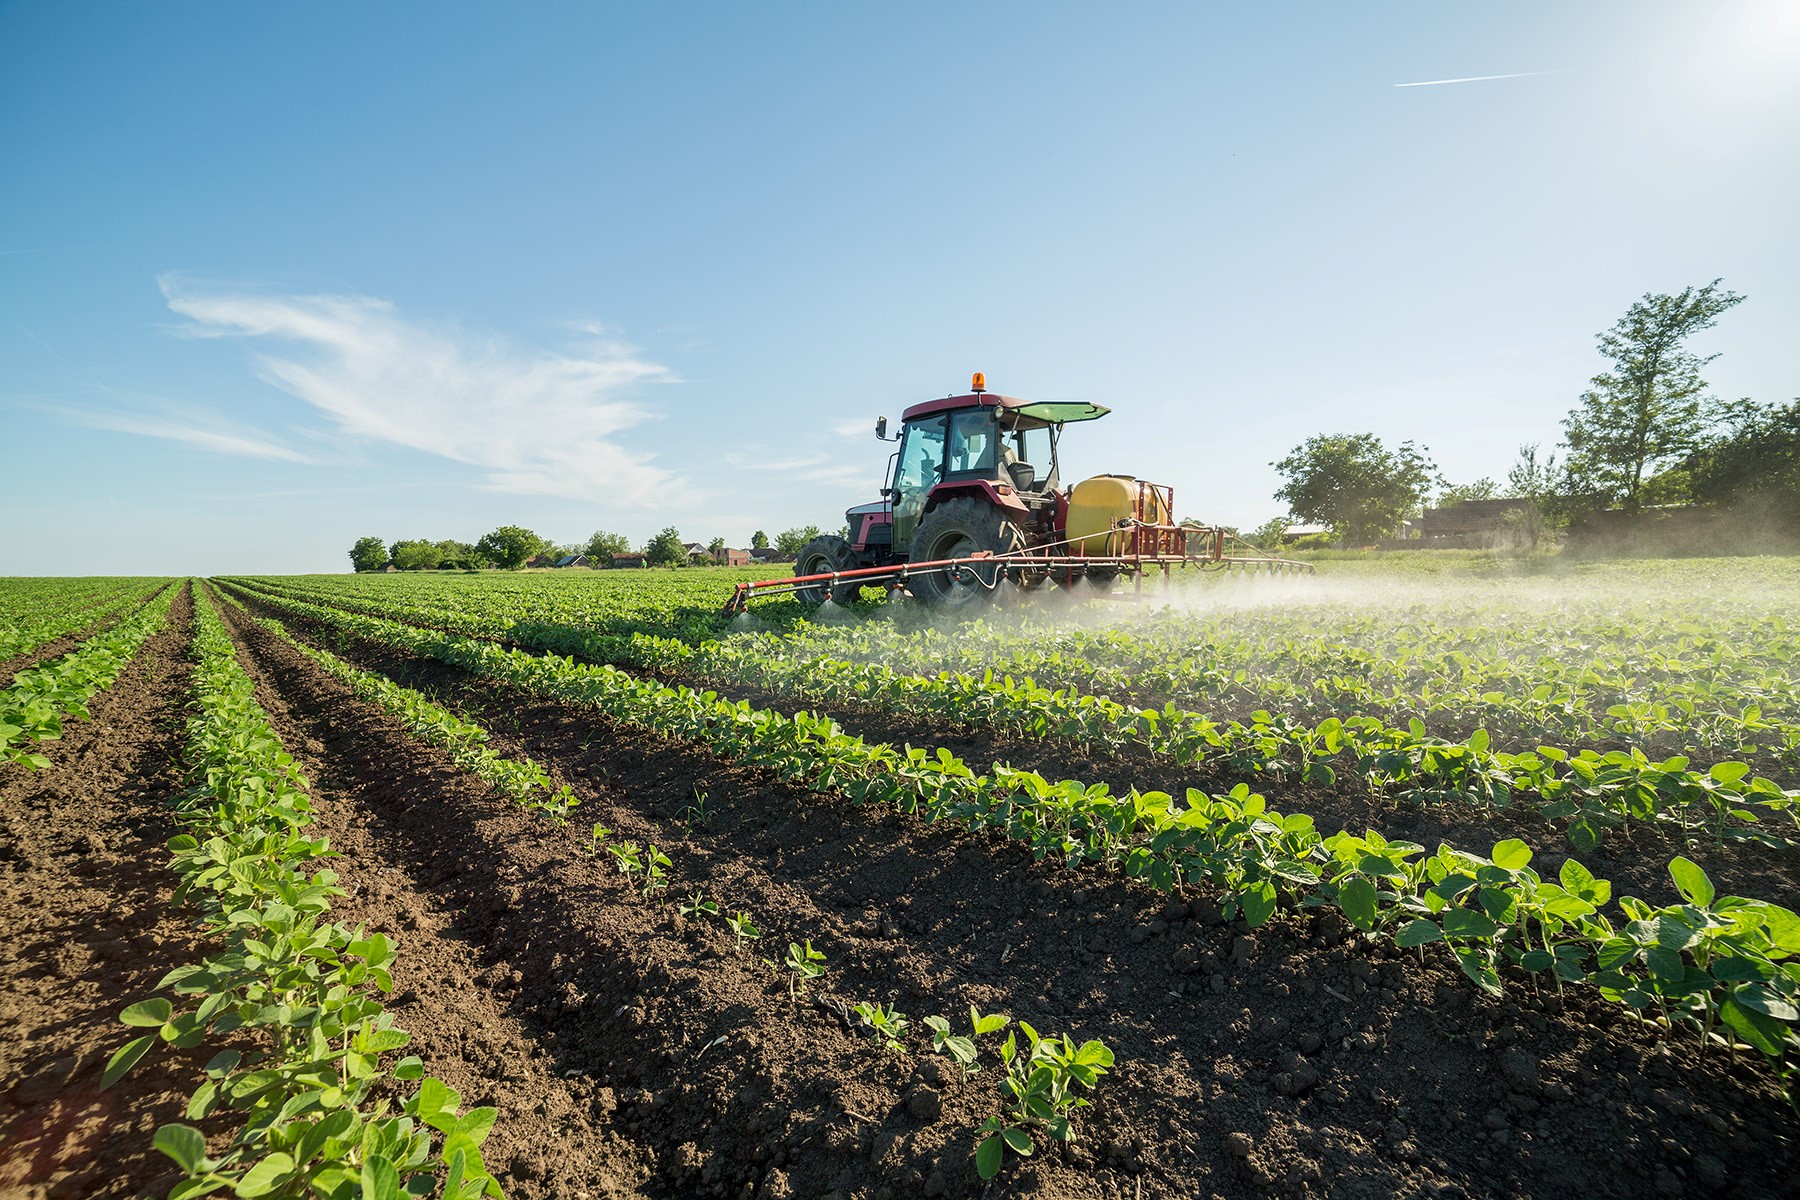 ASA's Kevin Scott Disappointed in EPA's Revocation of All Ag Tolerances for Chlorpyrifos